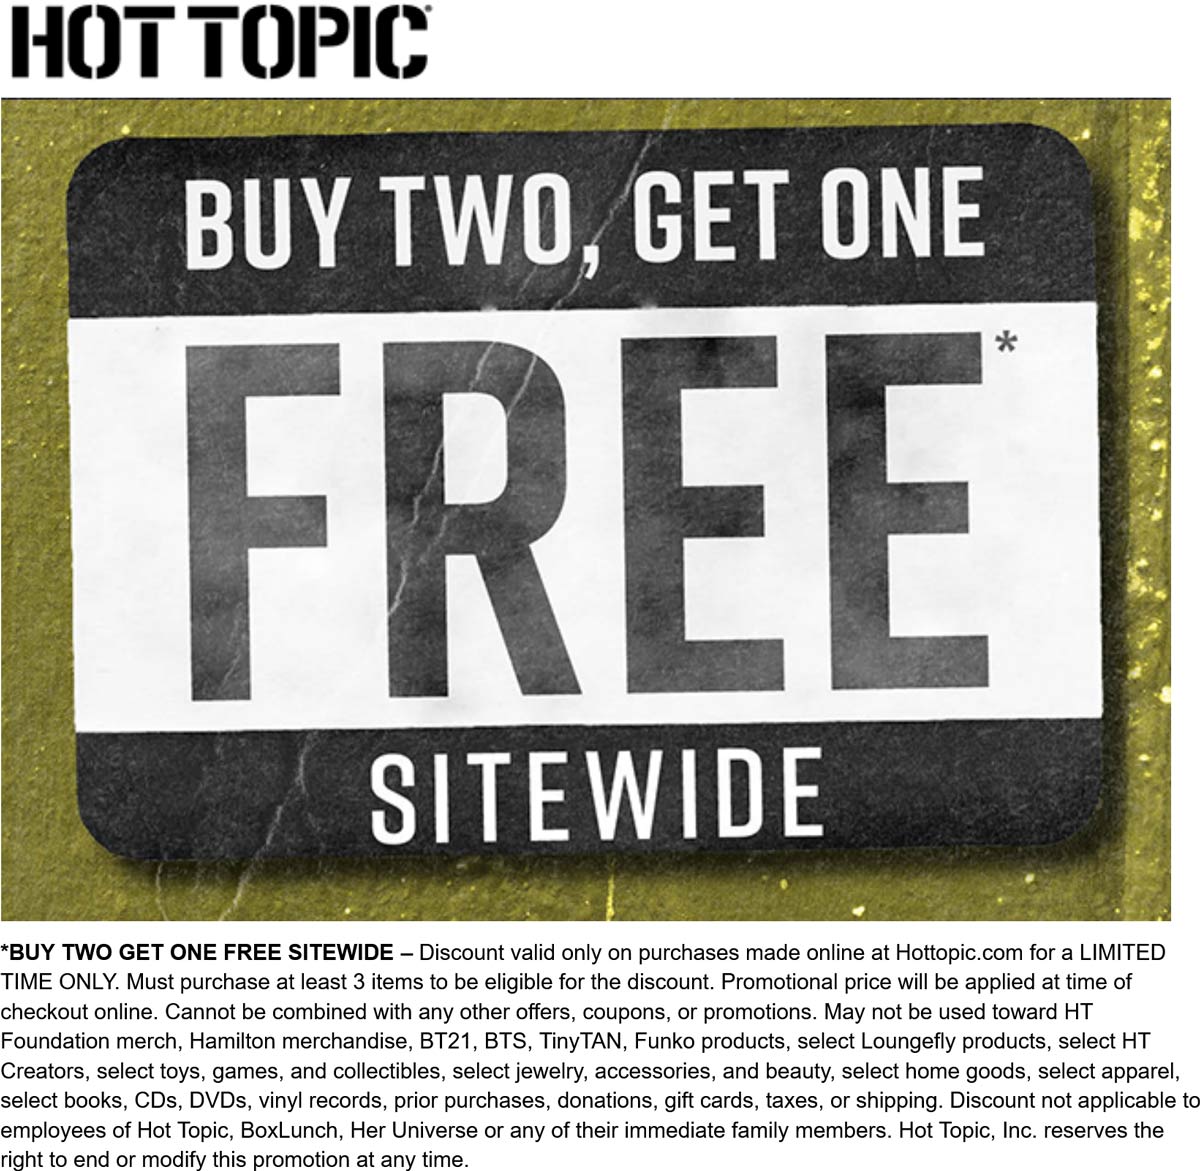 Hot Topic stores Coupon  3rd item free today at Hot Topic #hottopic 